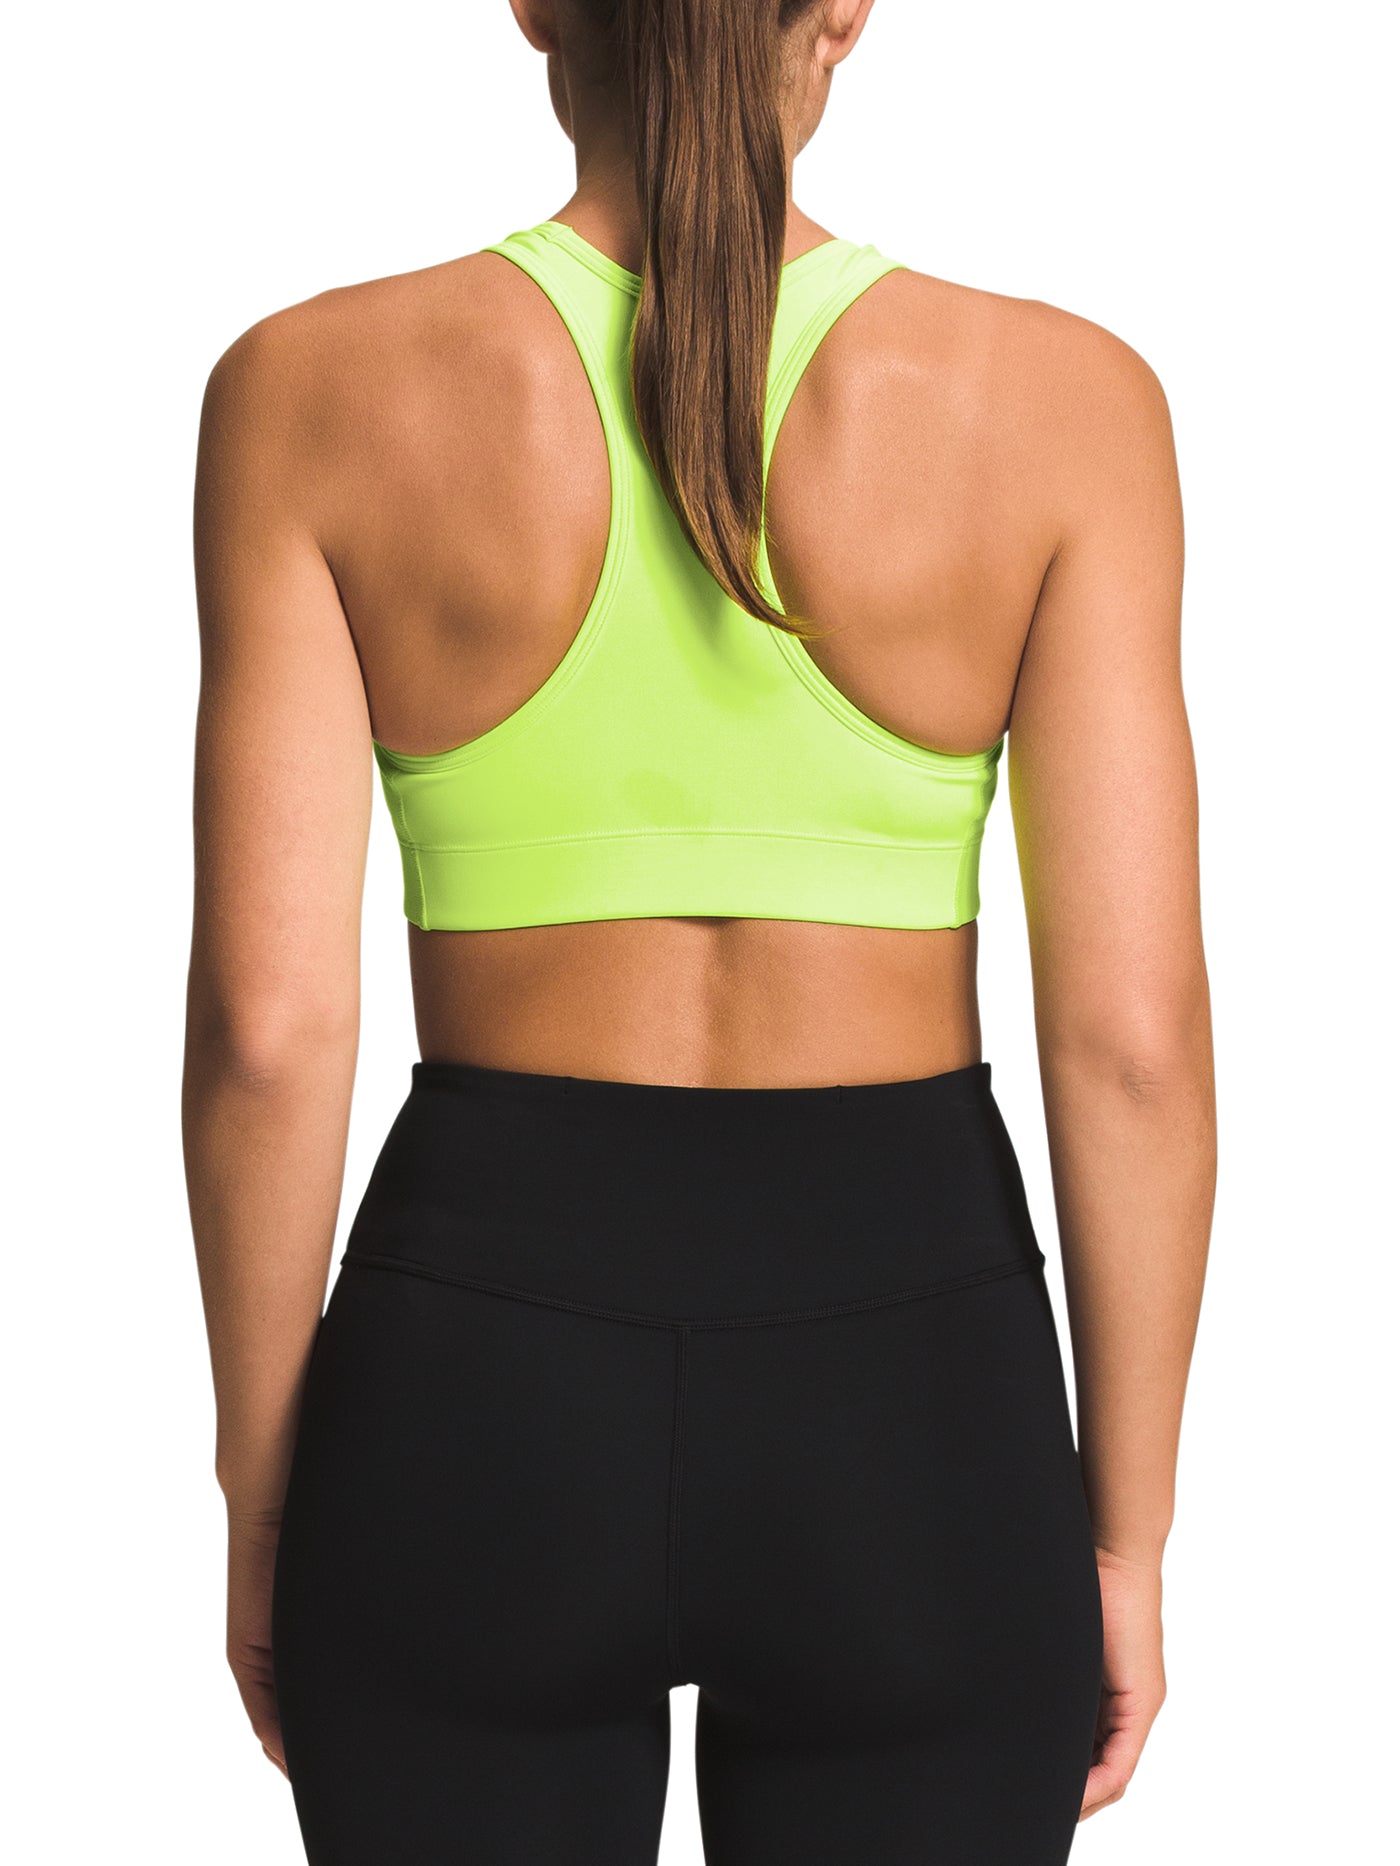 The North Face Spring 2023 Performance Essential Bralette